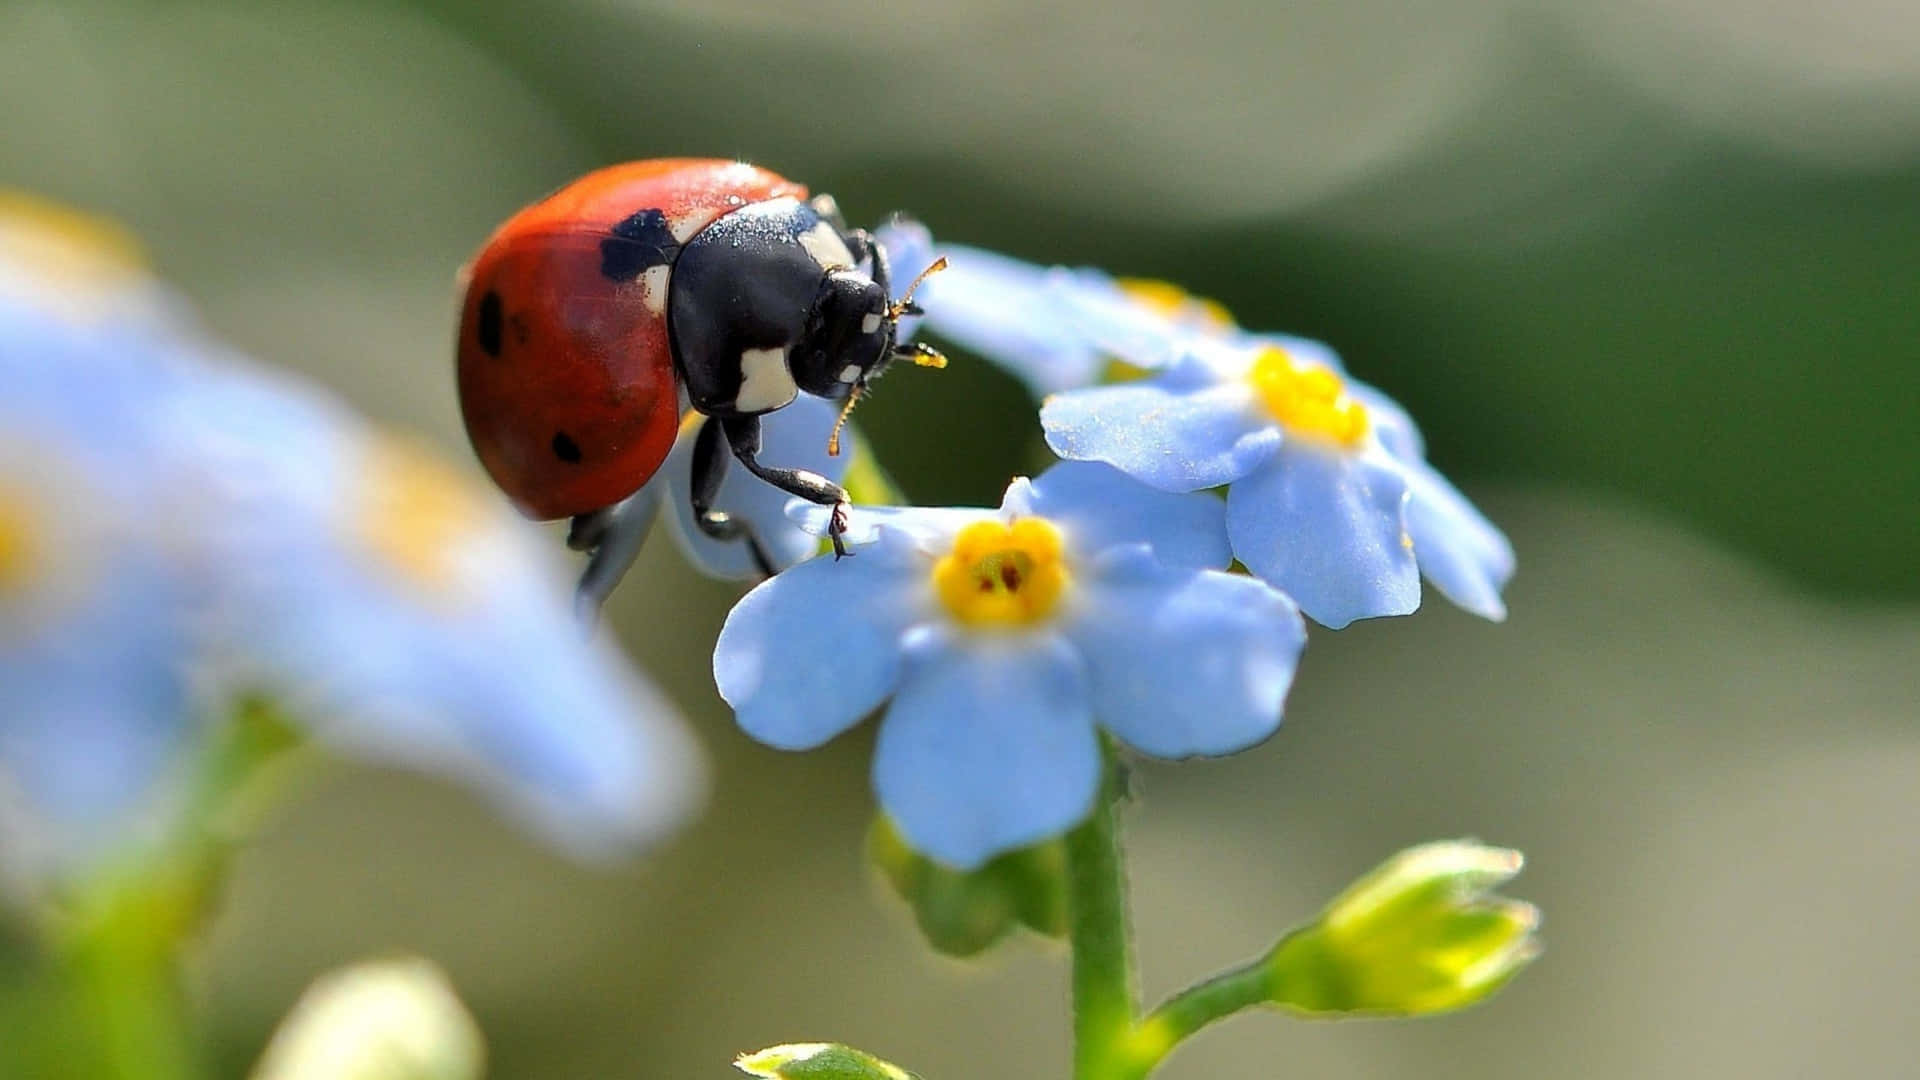 Cute Ladybug Pictures 1920 X 1080 Picture